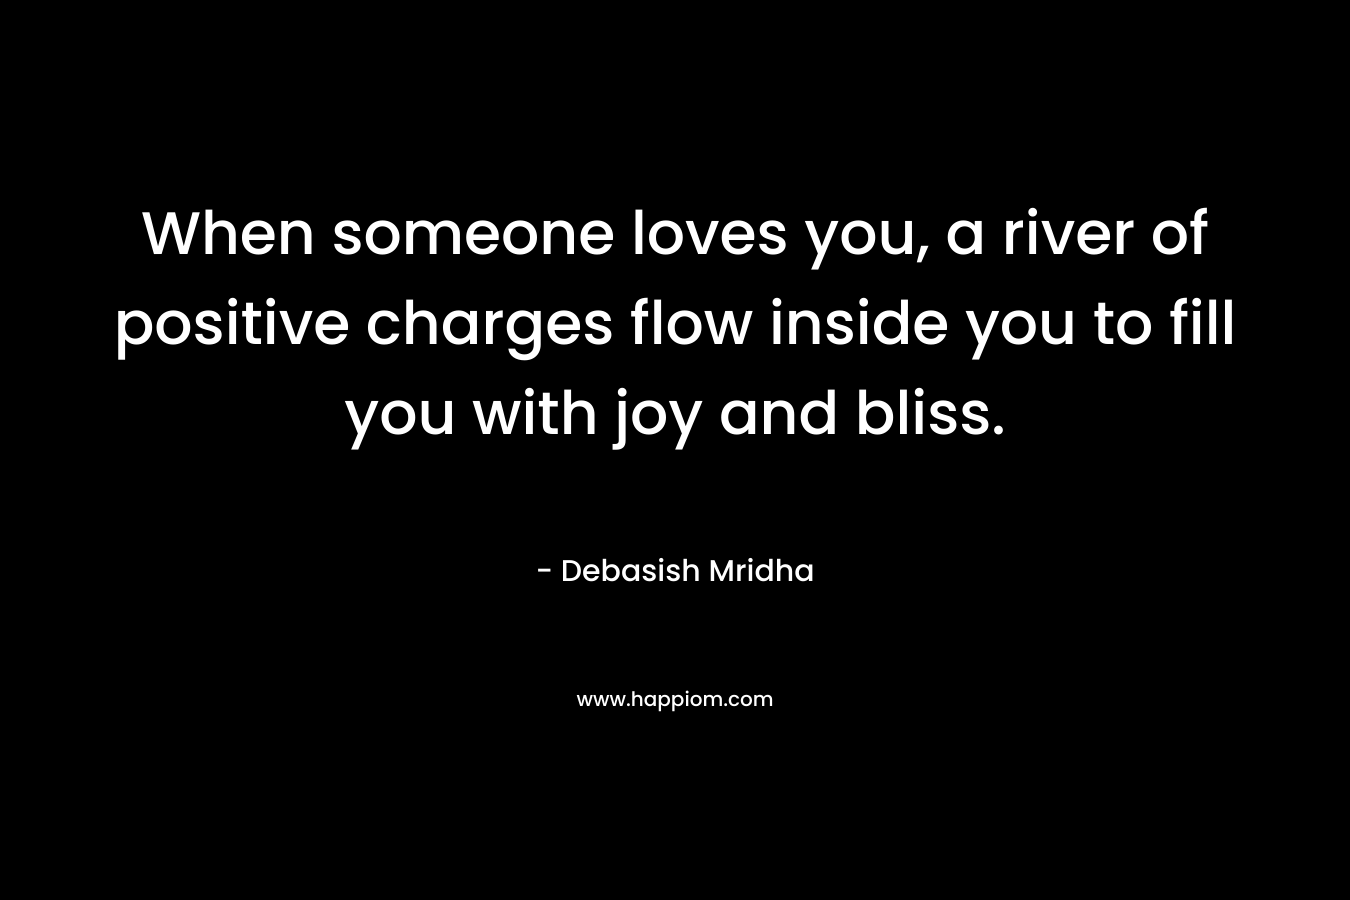 When someone loves you, a river of positive charges flow inside you to fill you with joy and bliss.